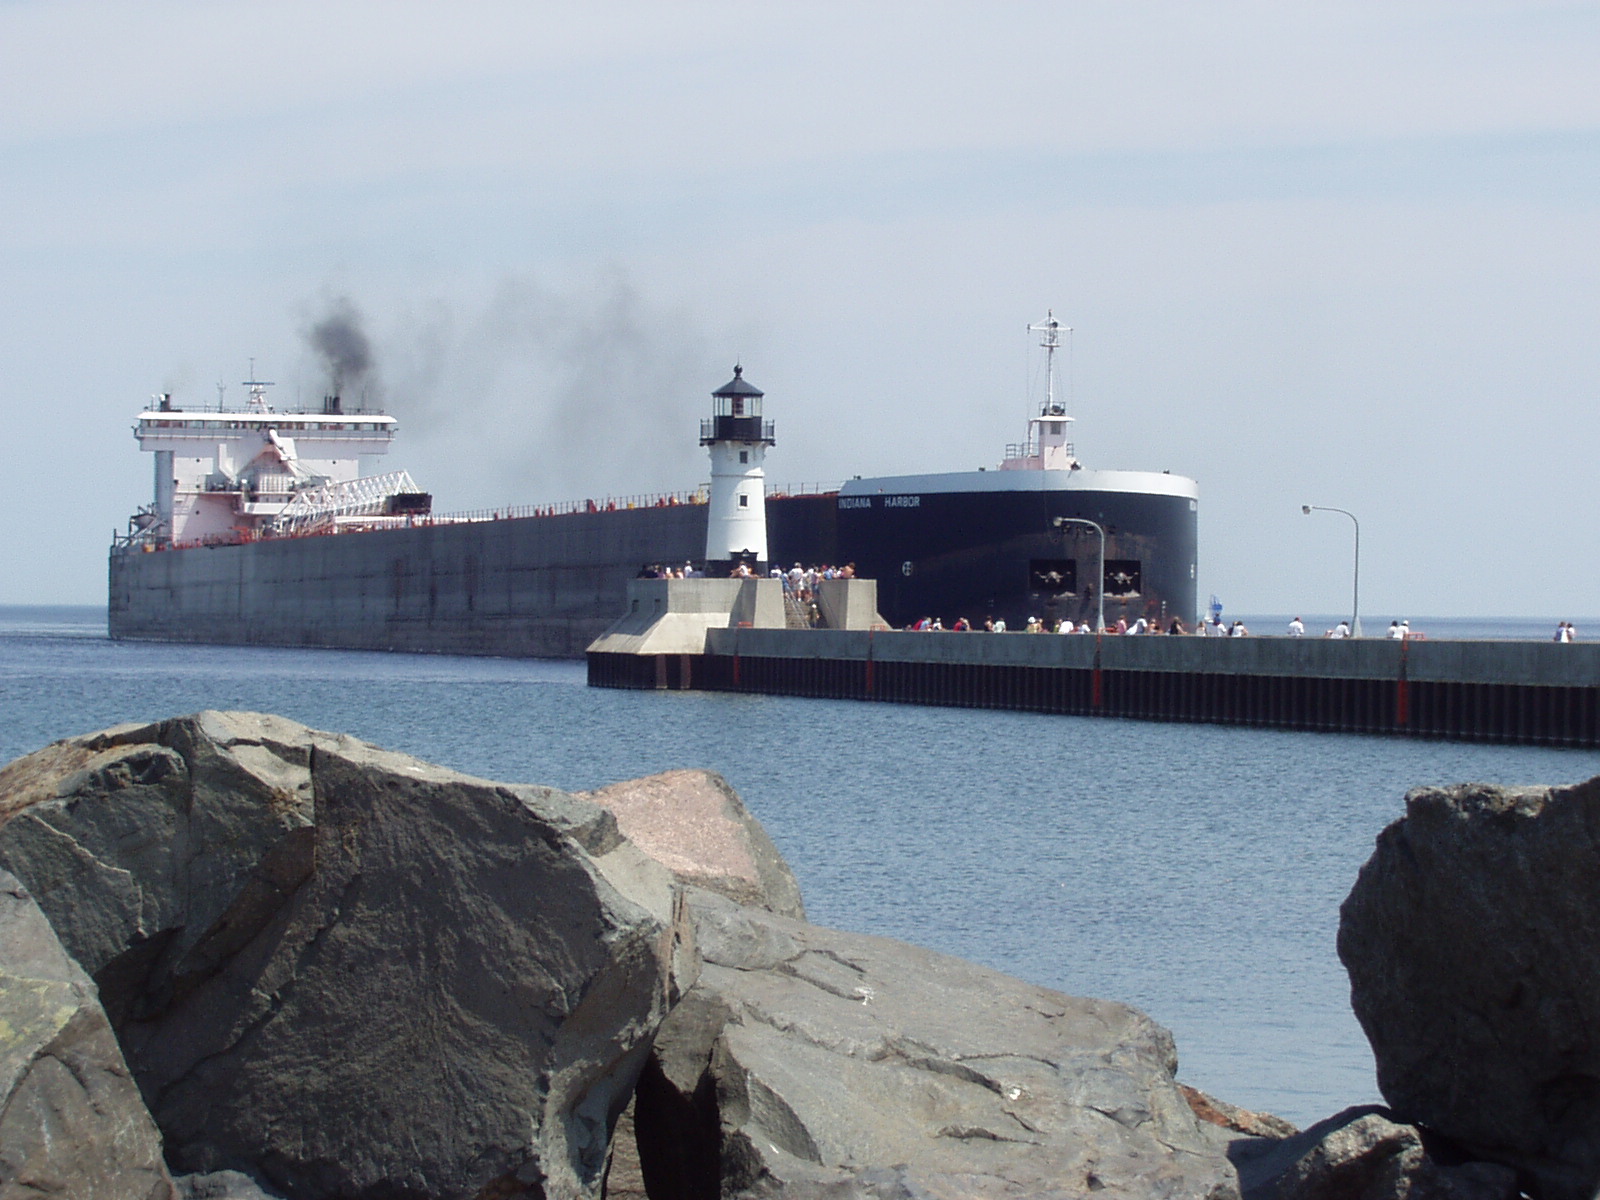  foot ore carrier Indiana Harbor arrives in Duluth Minnesota in 2002